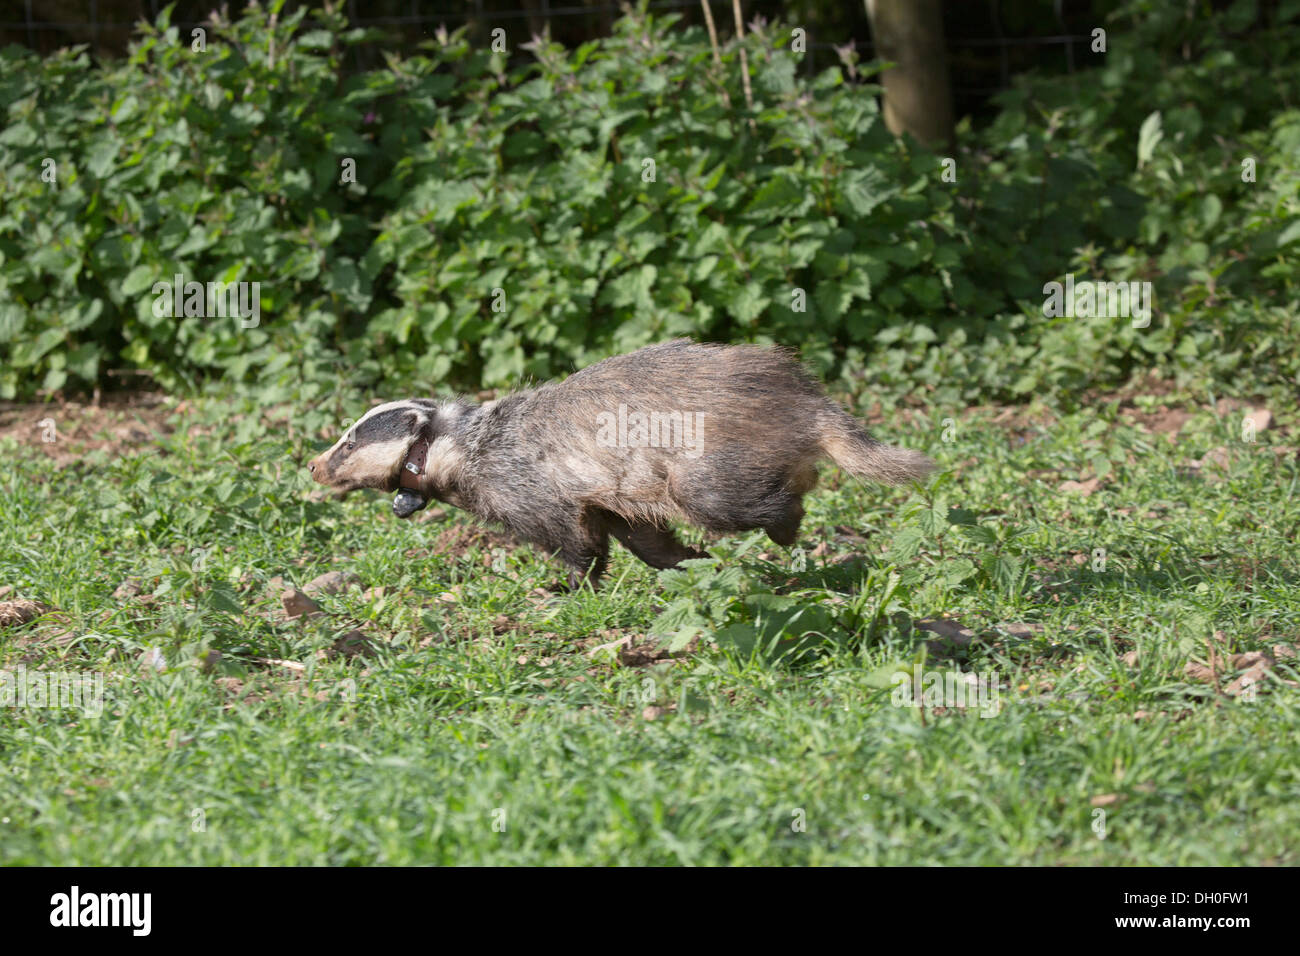 Badger; Meles meles; Wearing Tracer Collar to Track Movement; UK Stock Photo